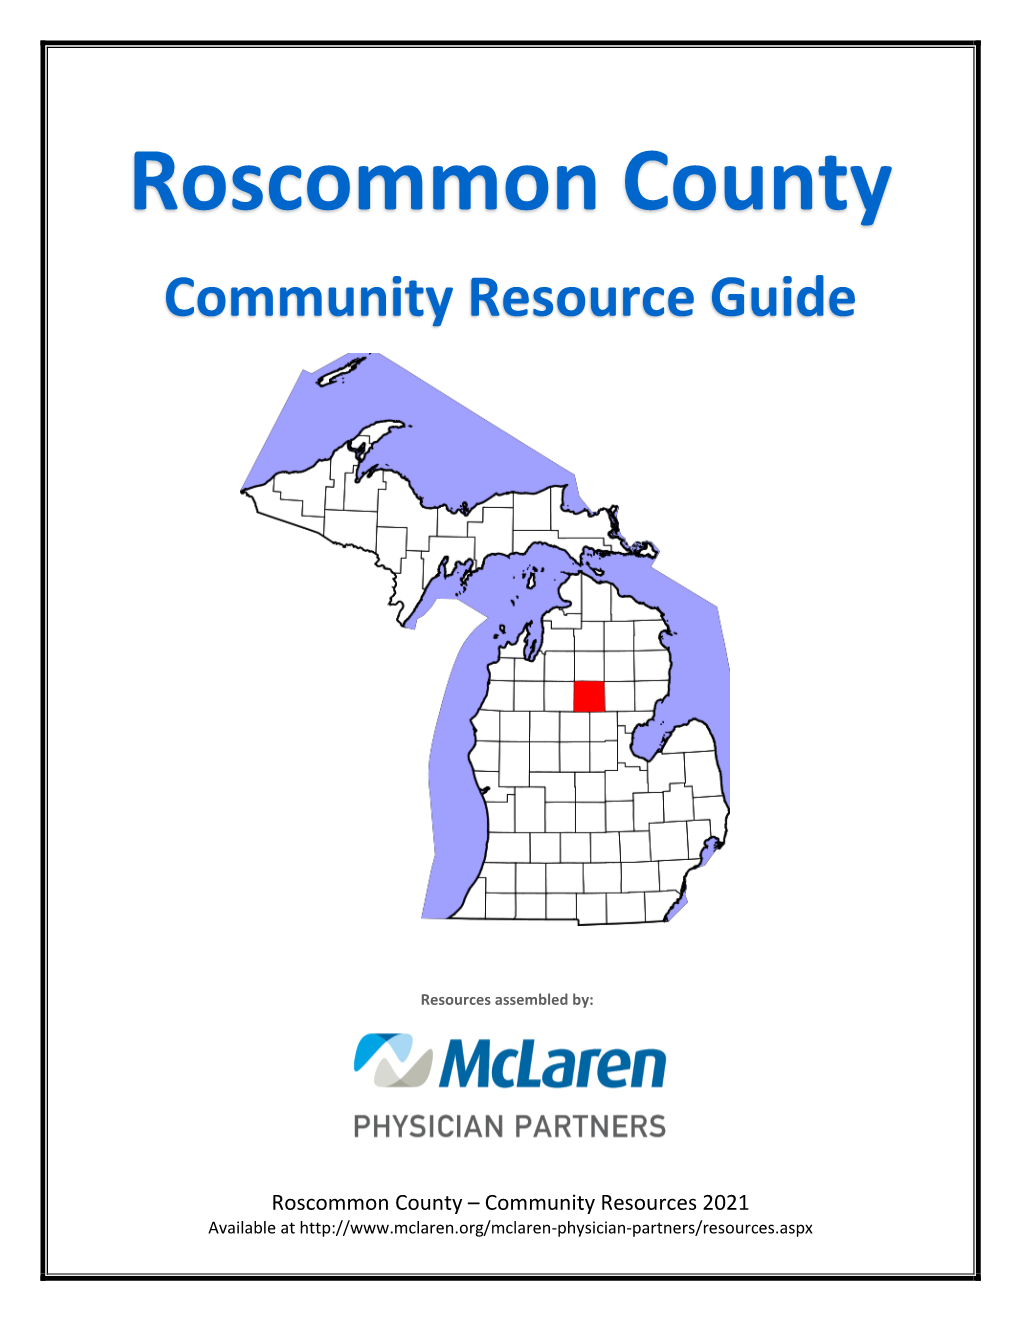 Roscommon County Community Resource Guide